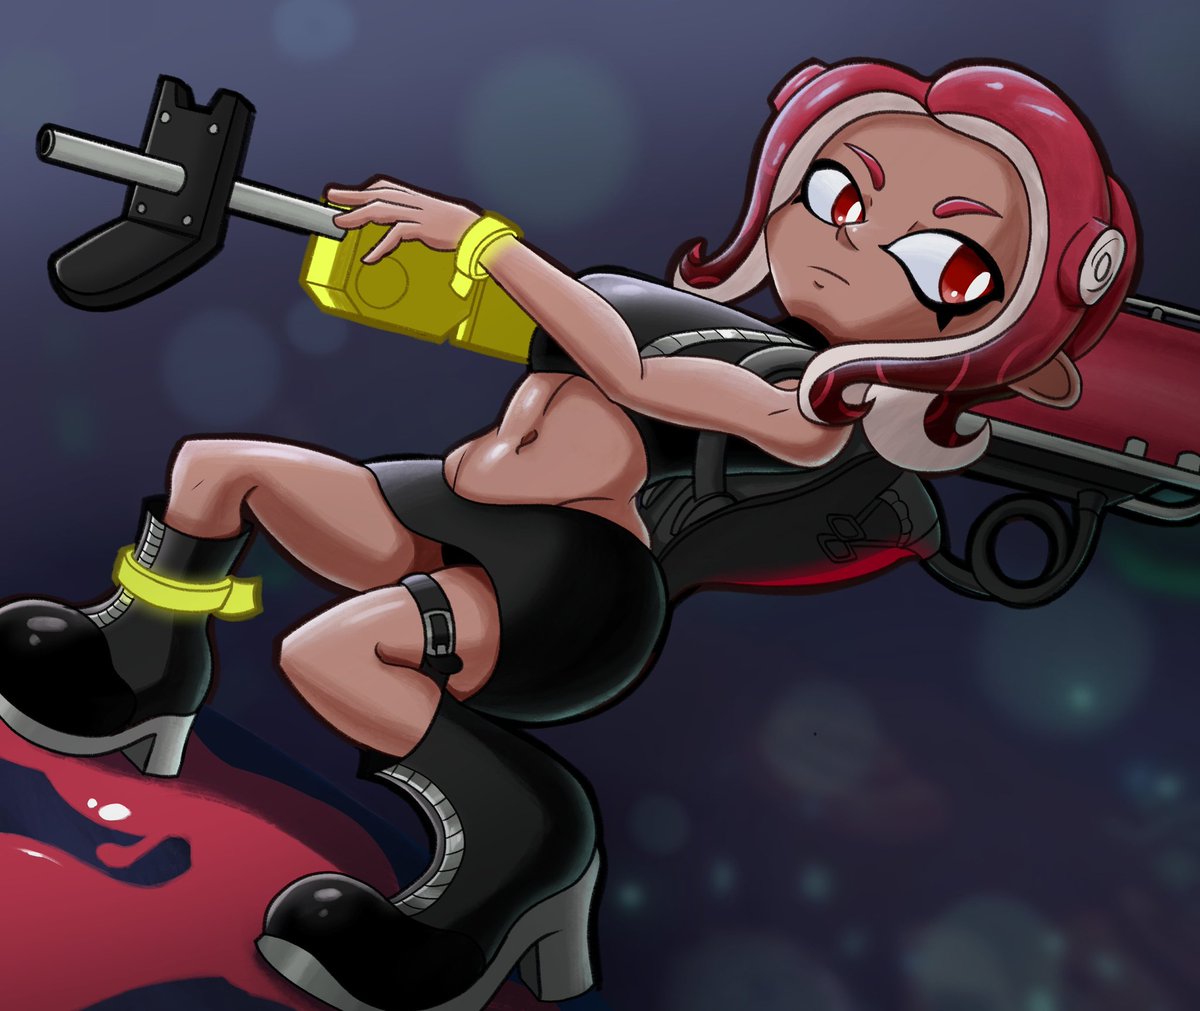 Agent 8

The best story mode in splatoon is the octoexpansion, I hope you like it.